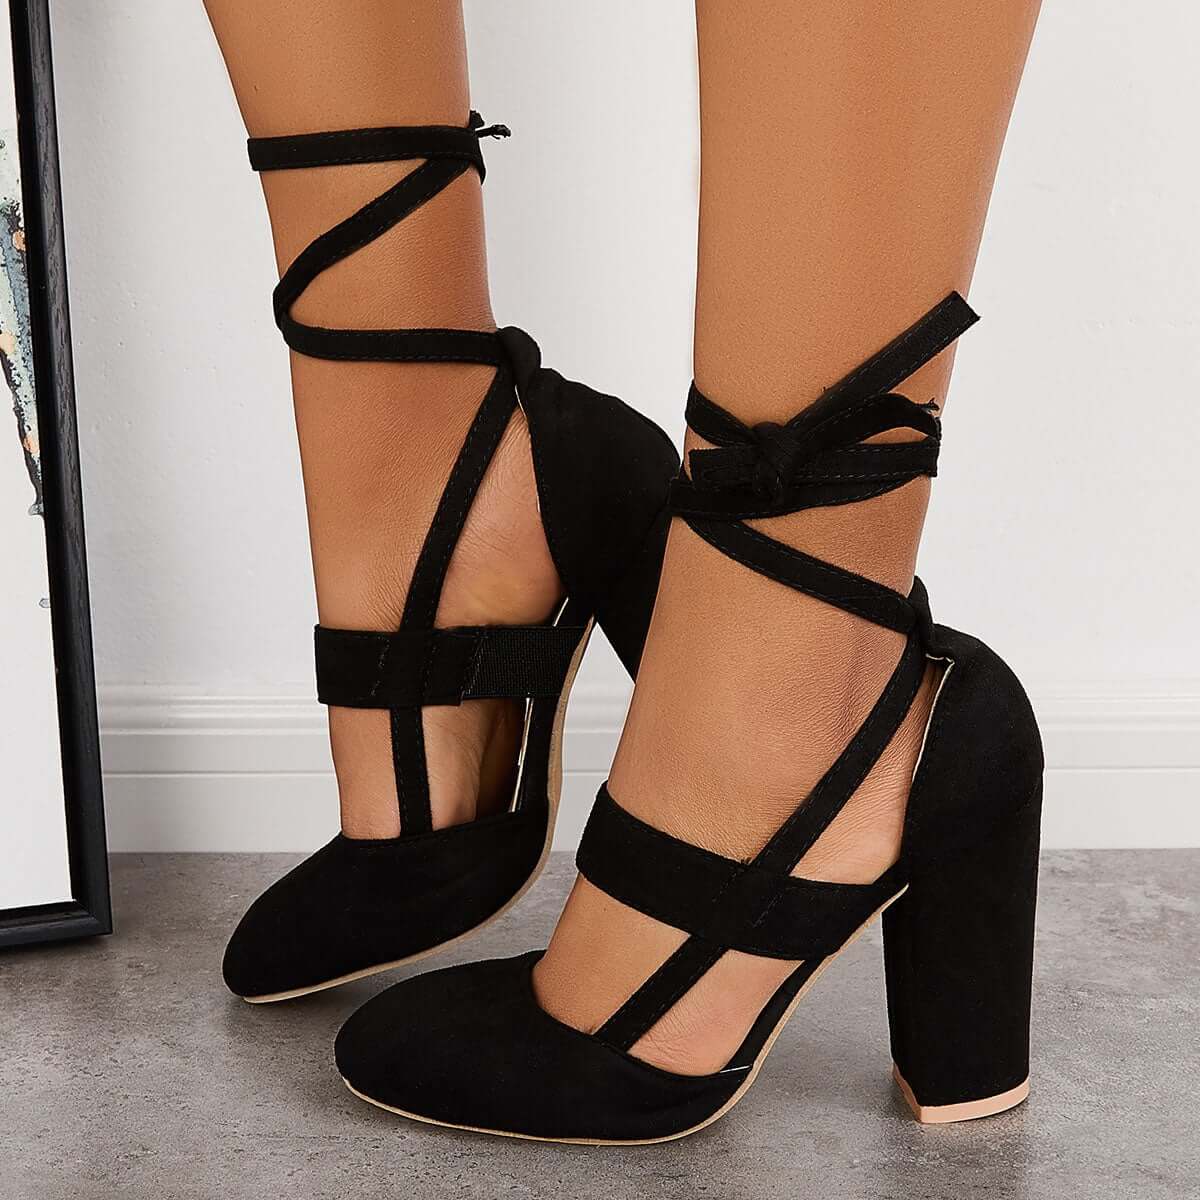 Chunky Block High Heels Lace Up Dress Sandals Ankle Strappy Pumps